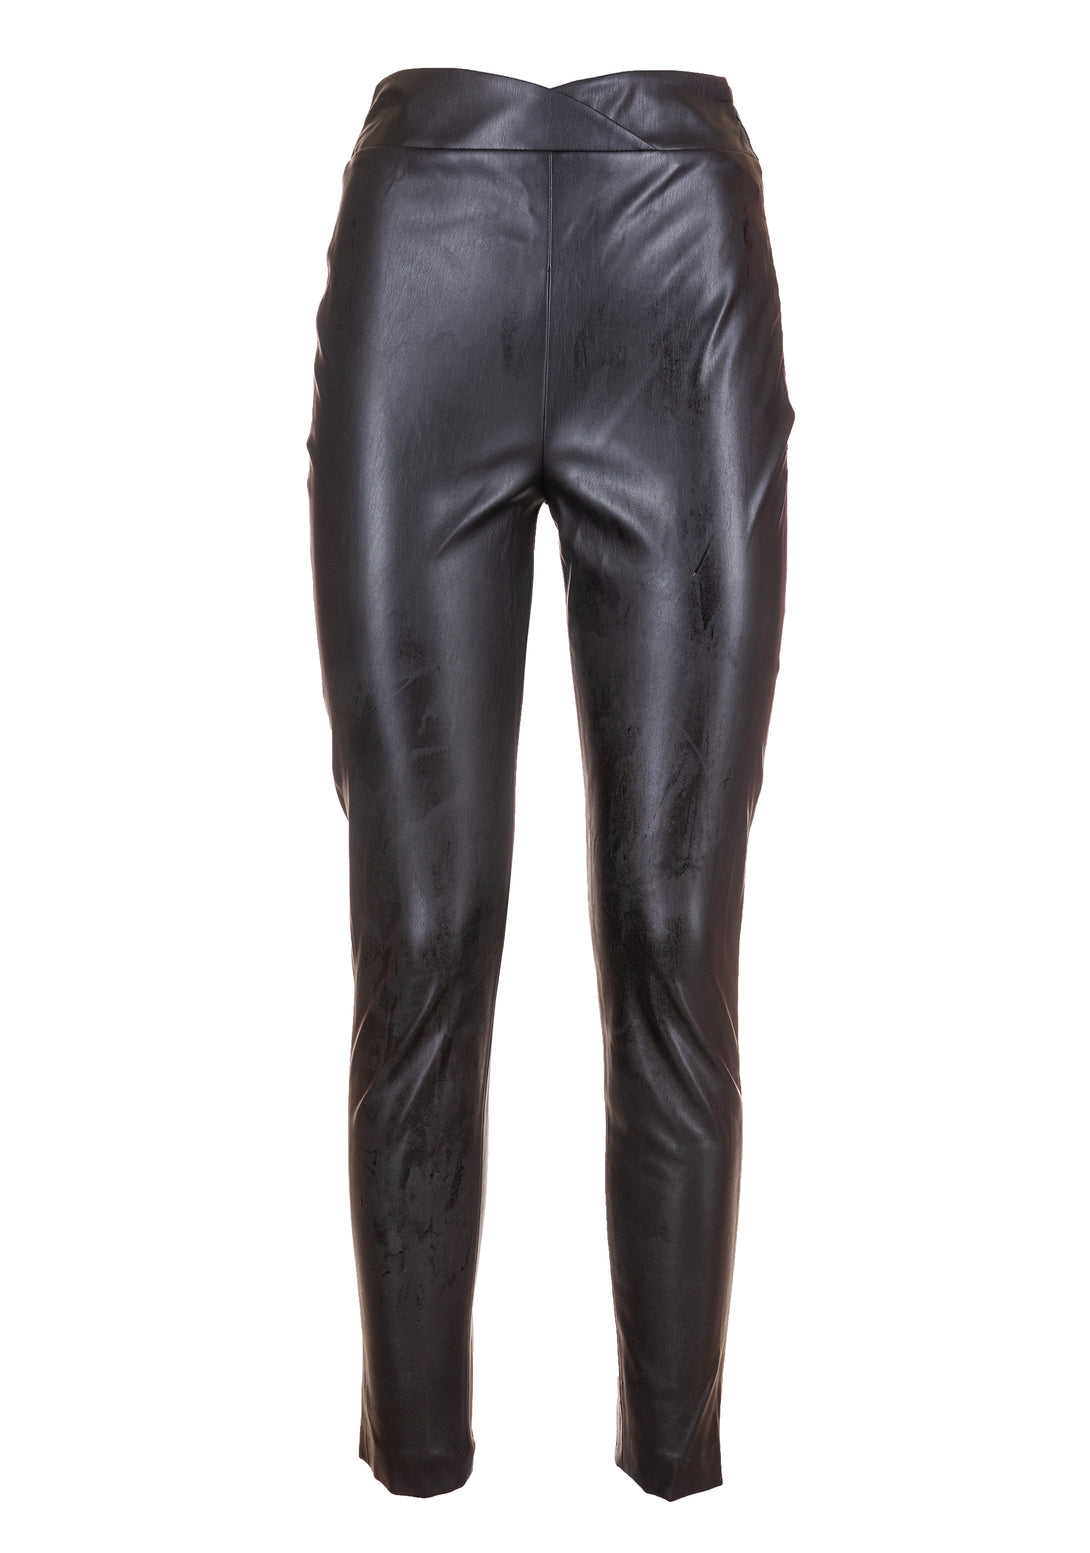 Leggings slim fit made in eco leather